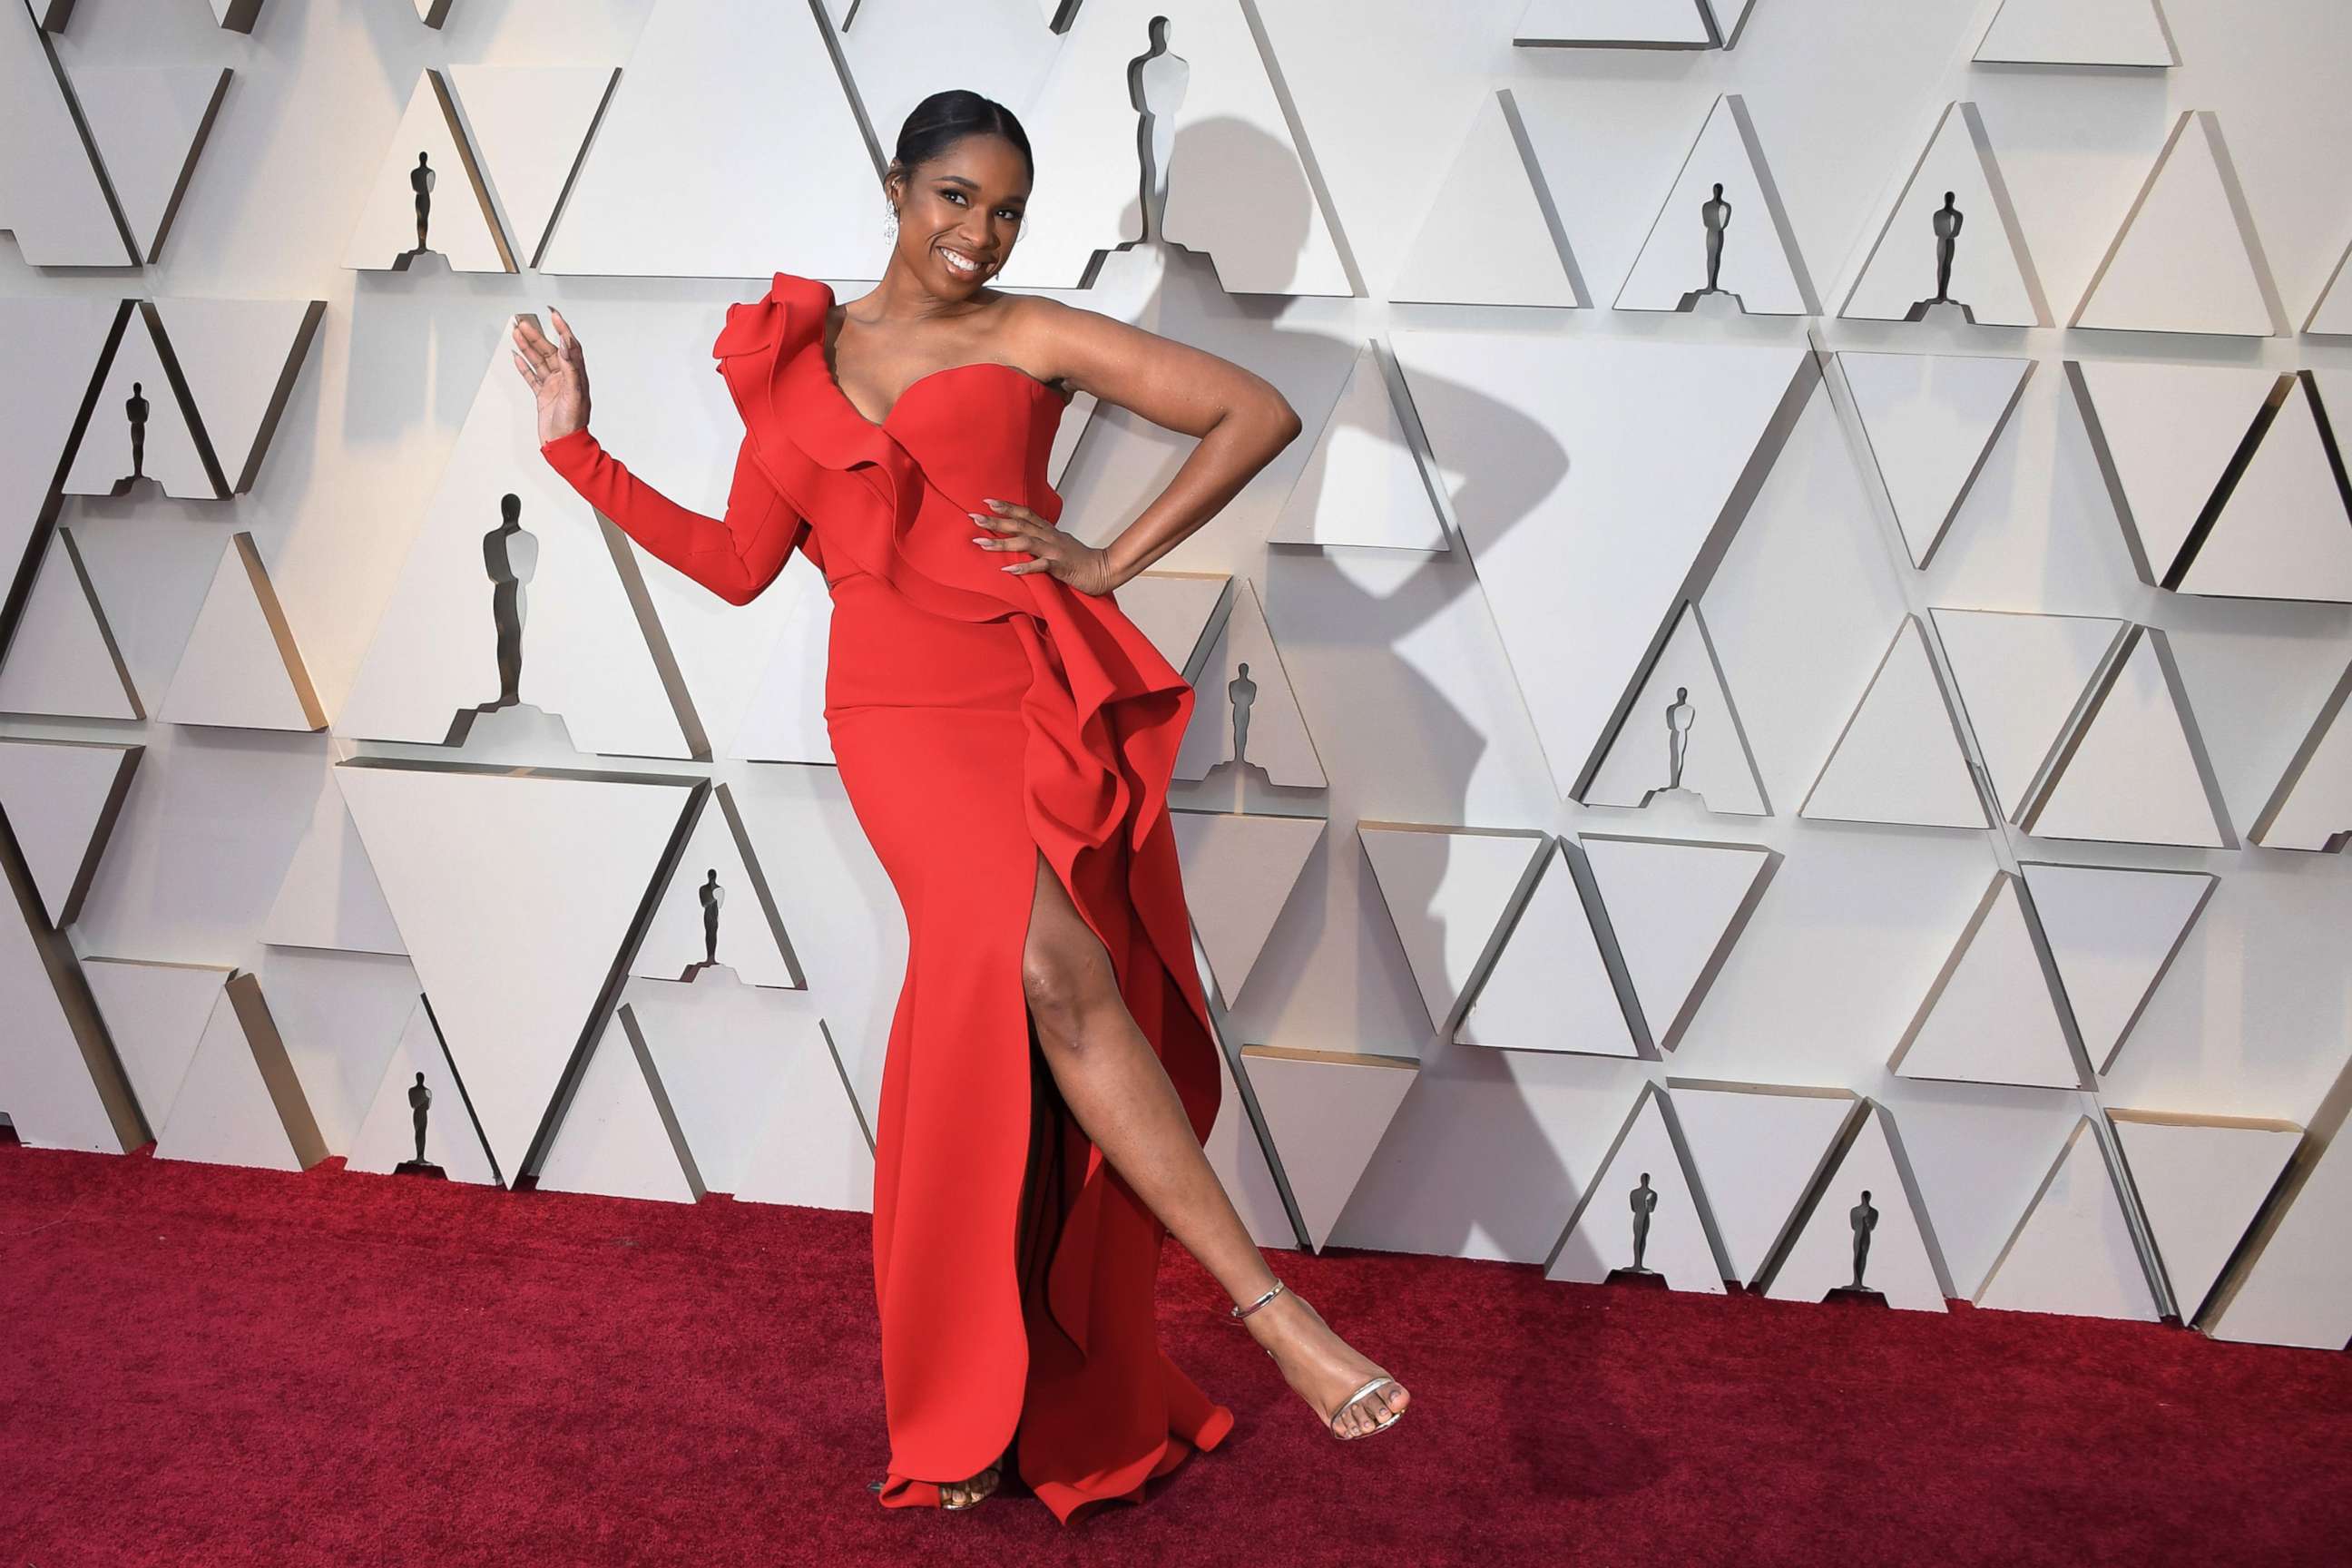 PHOTO: Singer Jennifer Hudson arrives for the 91st Annual Academy Awards at the Dolby Theatre in Hollywood, Calif., Feb. 24, 2019.